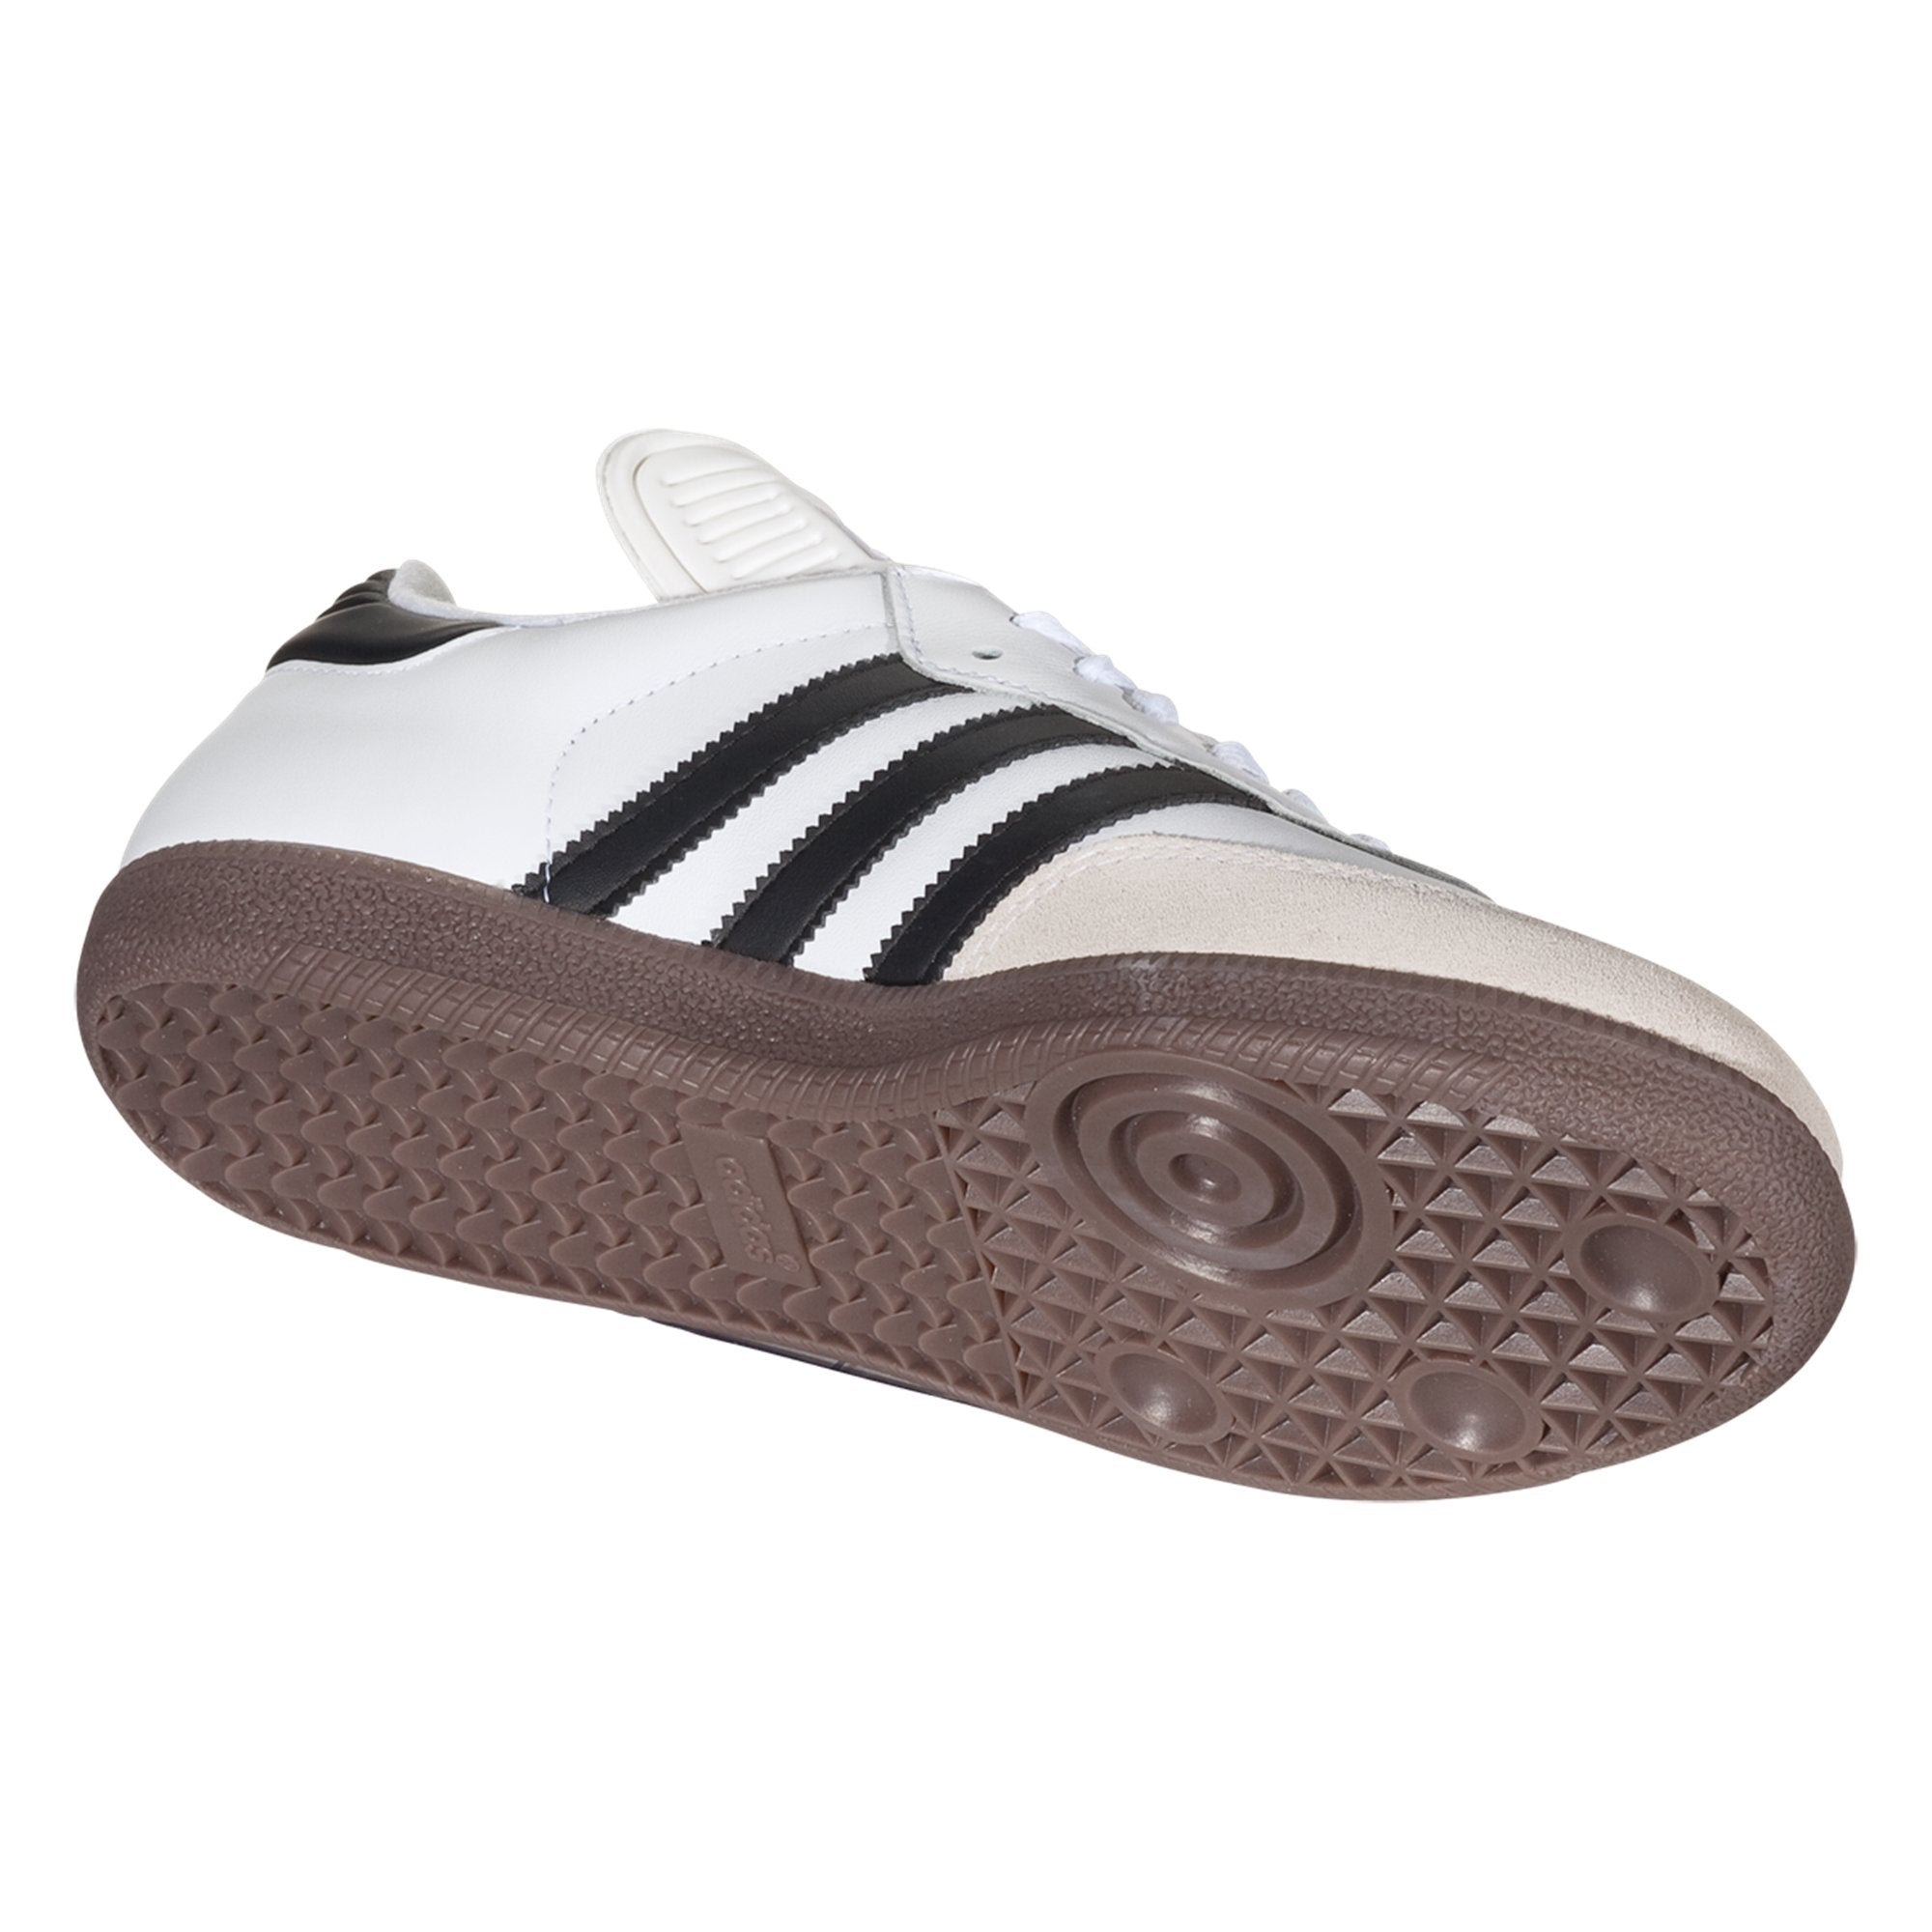 adidas sneakers classic